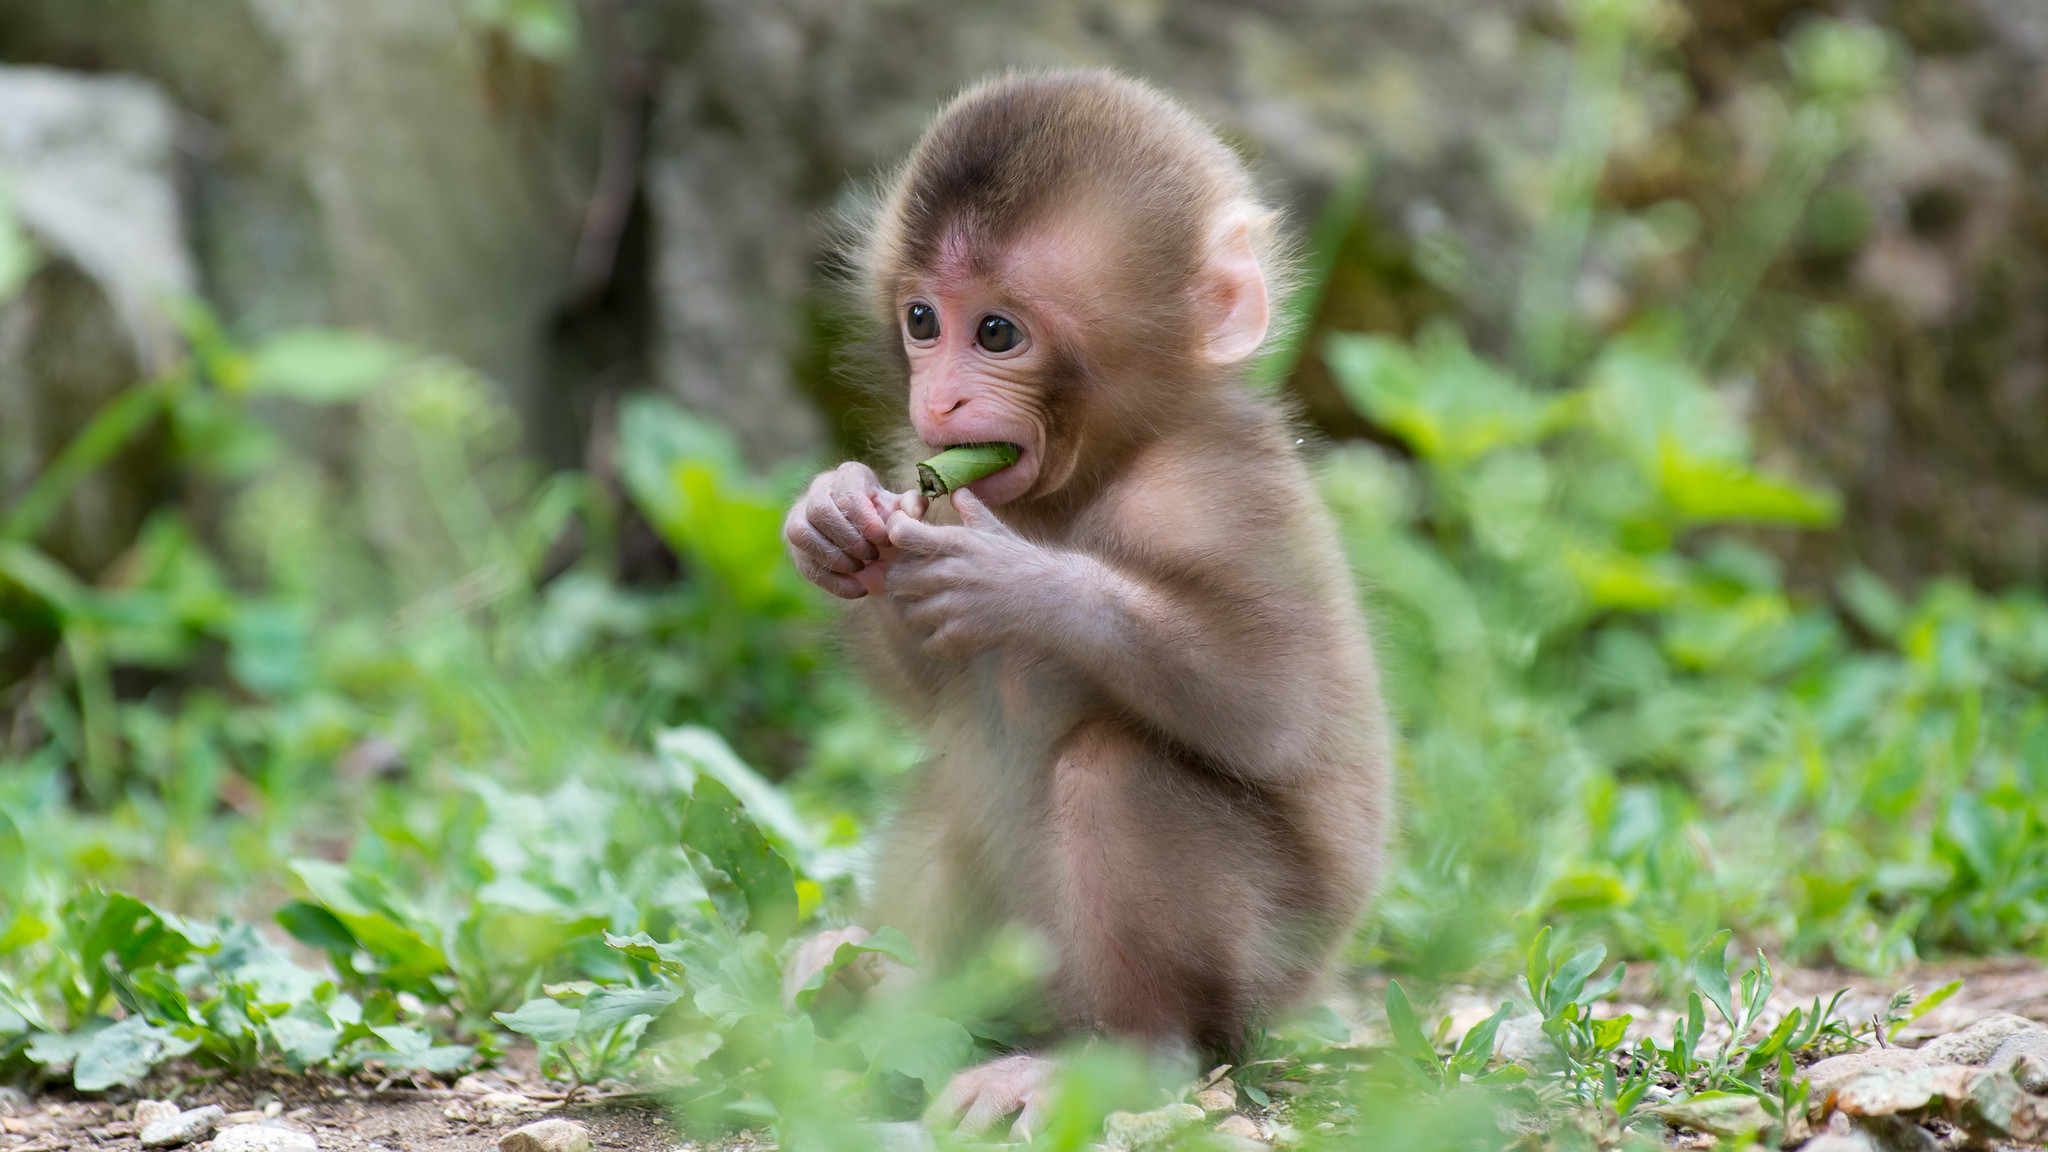 Baby Monkey Wallpaper (72+ images)